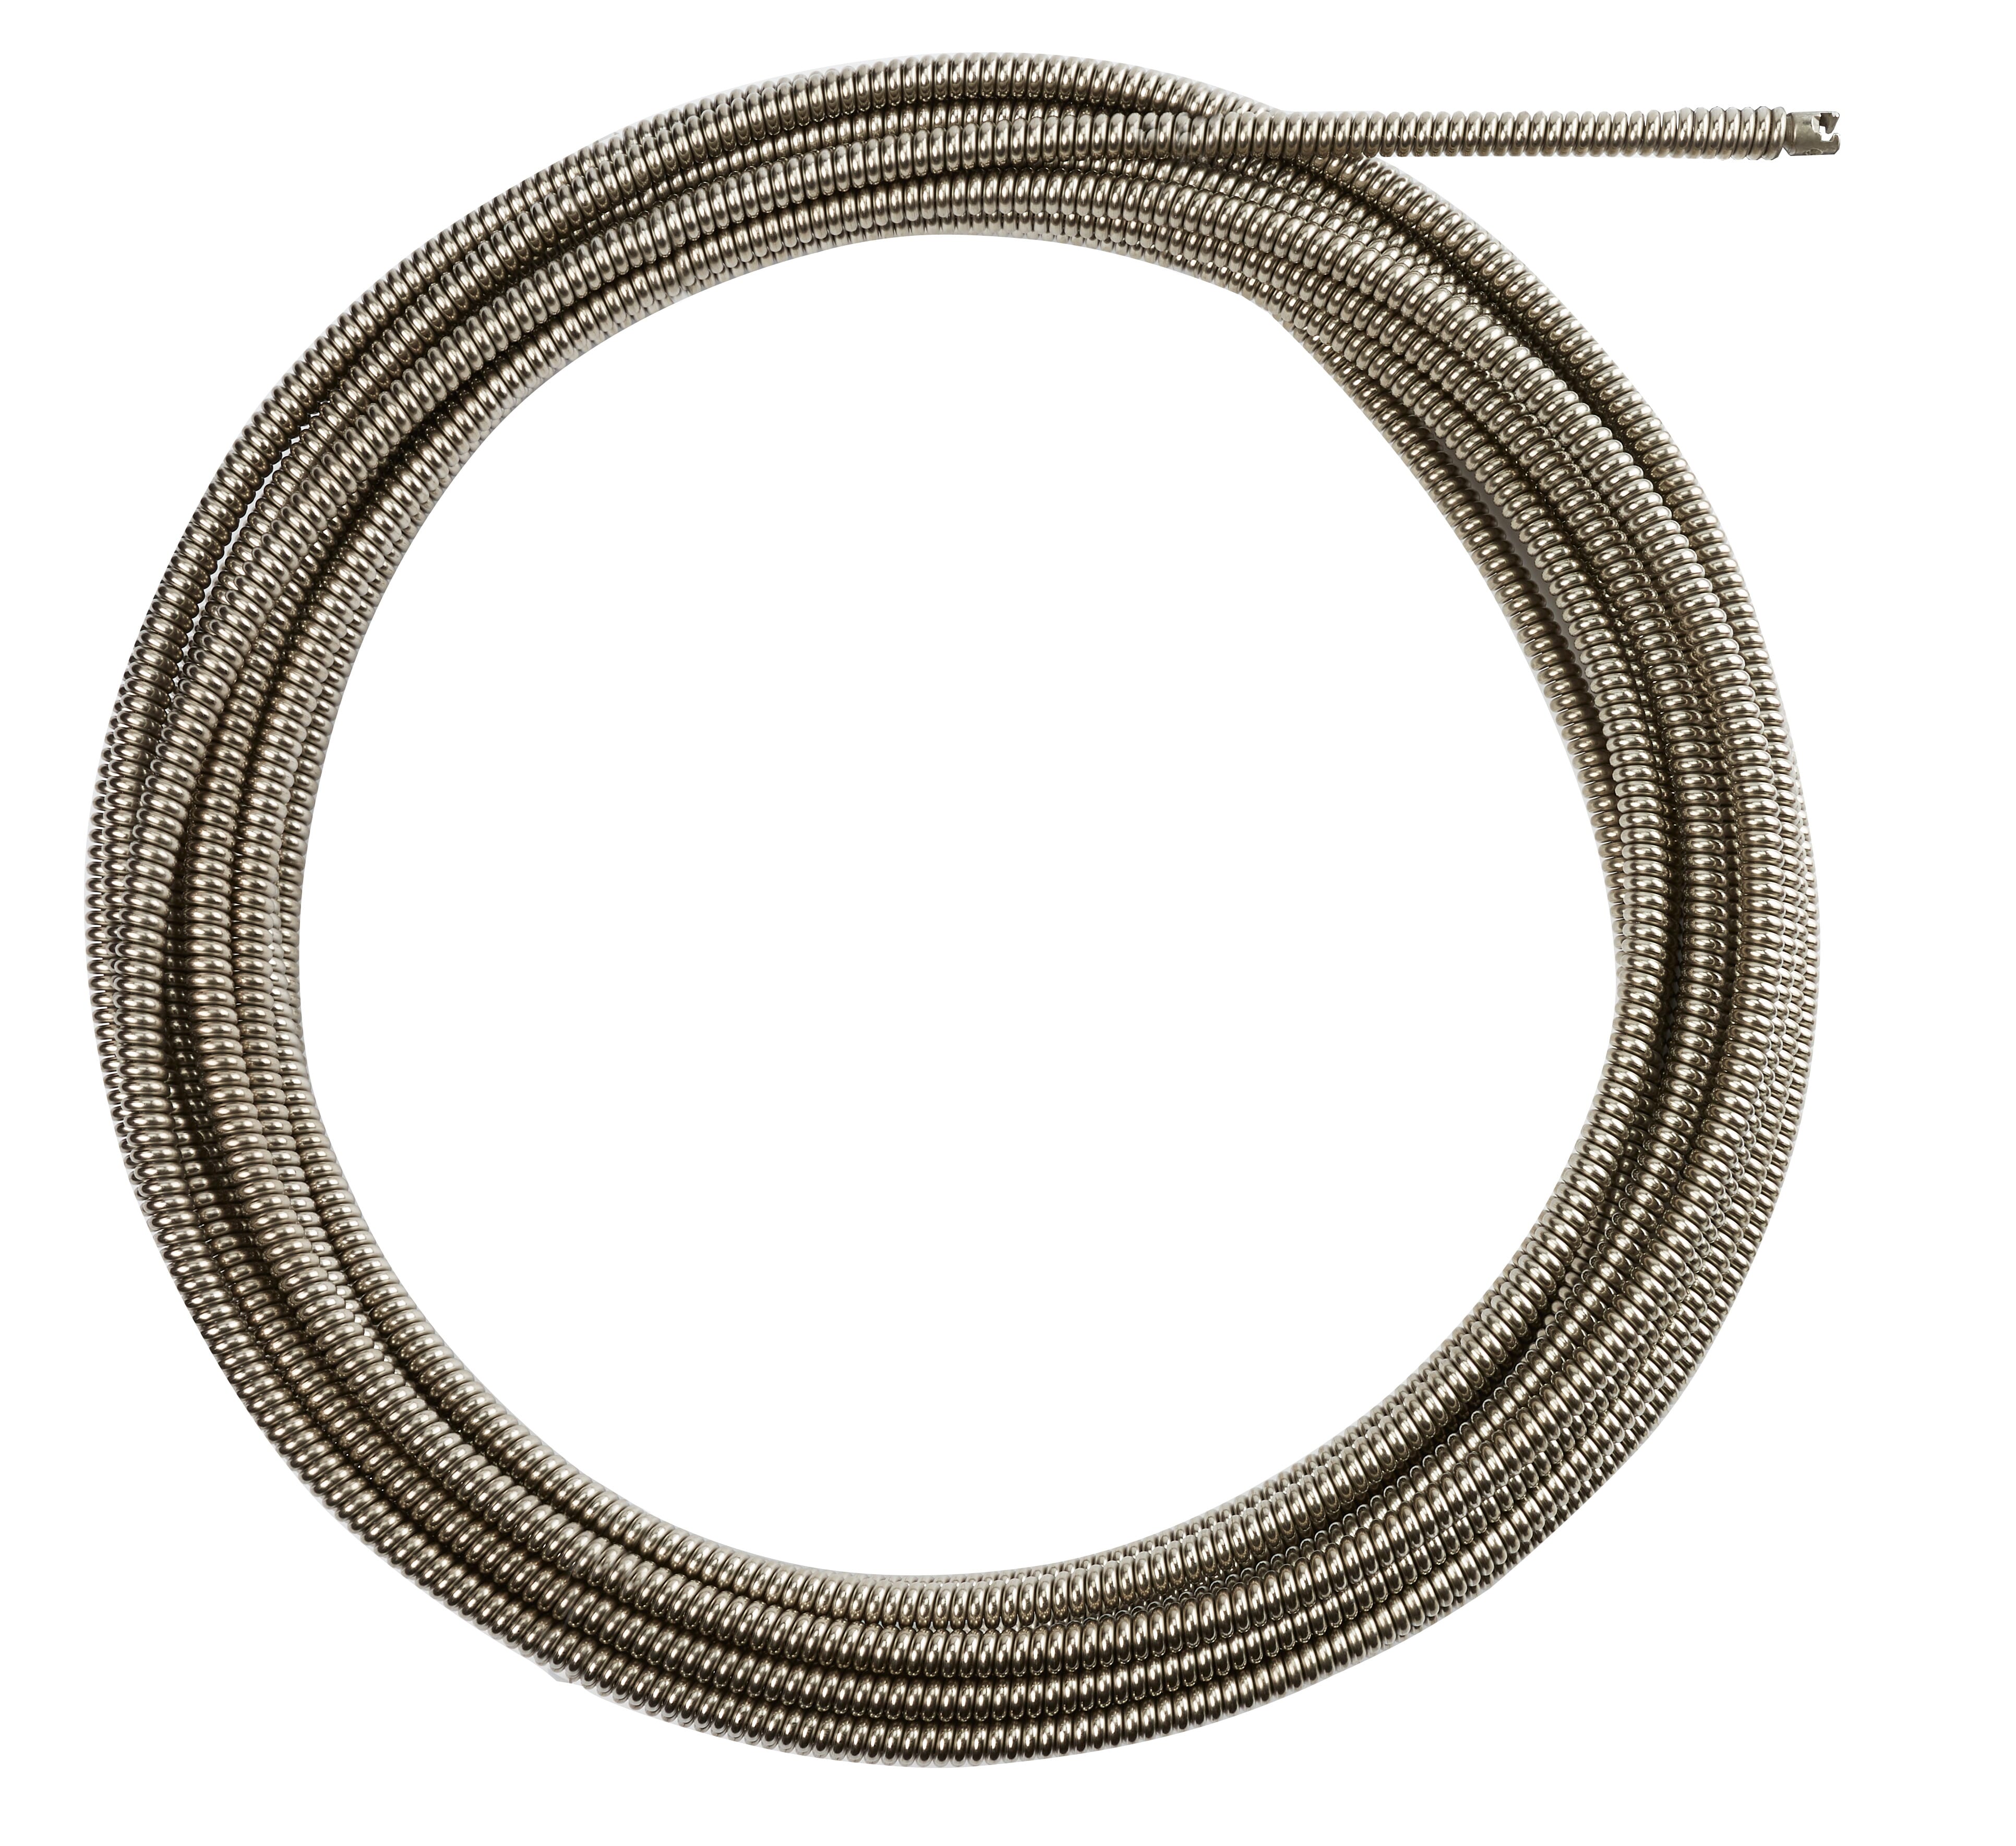 Milwaukee® 48-53-2775 Open Wind Coupling Drain Cleaning Cable, 5/8 in, Steel, For Use With Drain Cleaning Machines, 1-1/4 to 2-1/2 in Drain Line